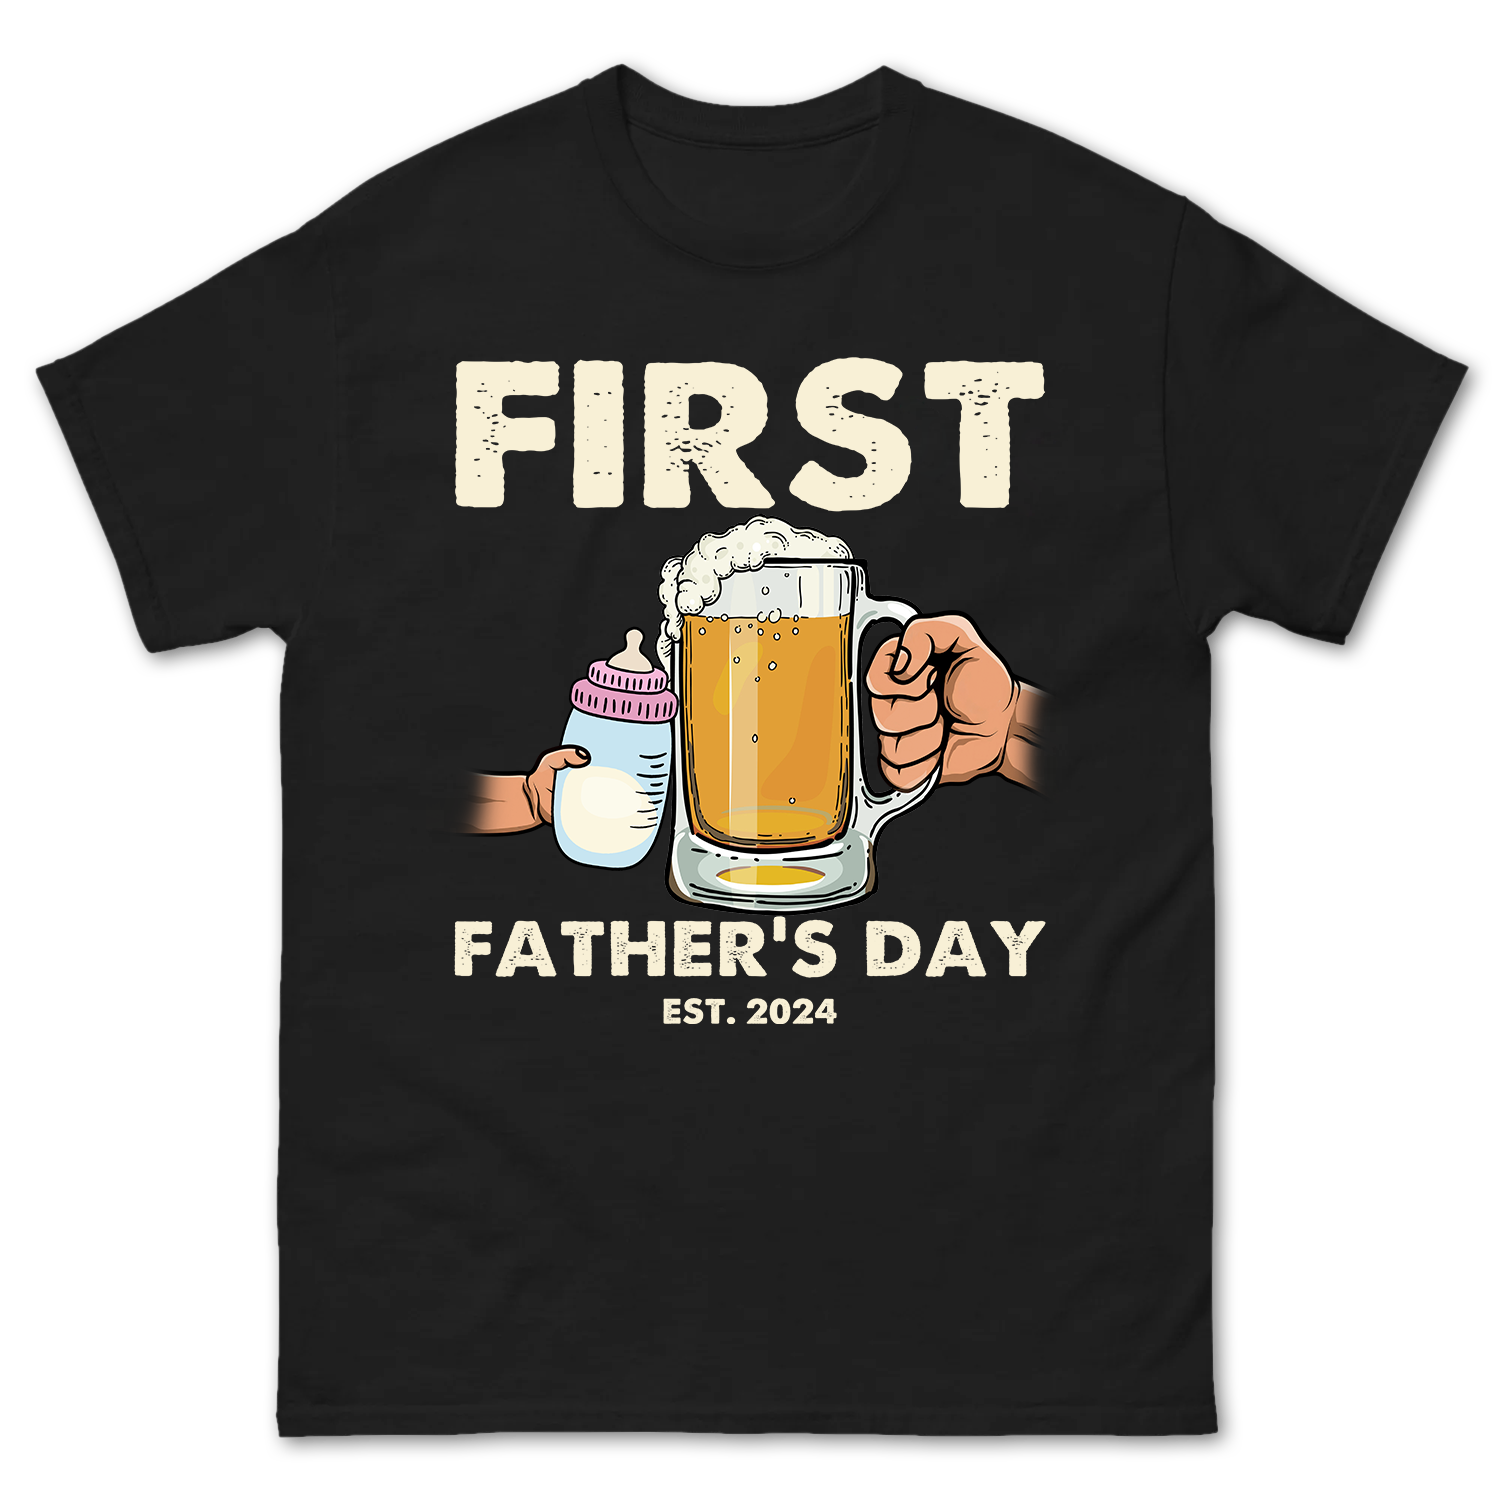 Personalized First Father's Day Shirt